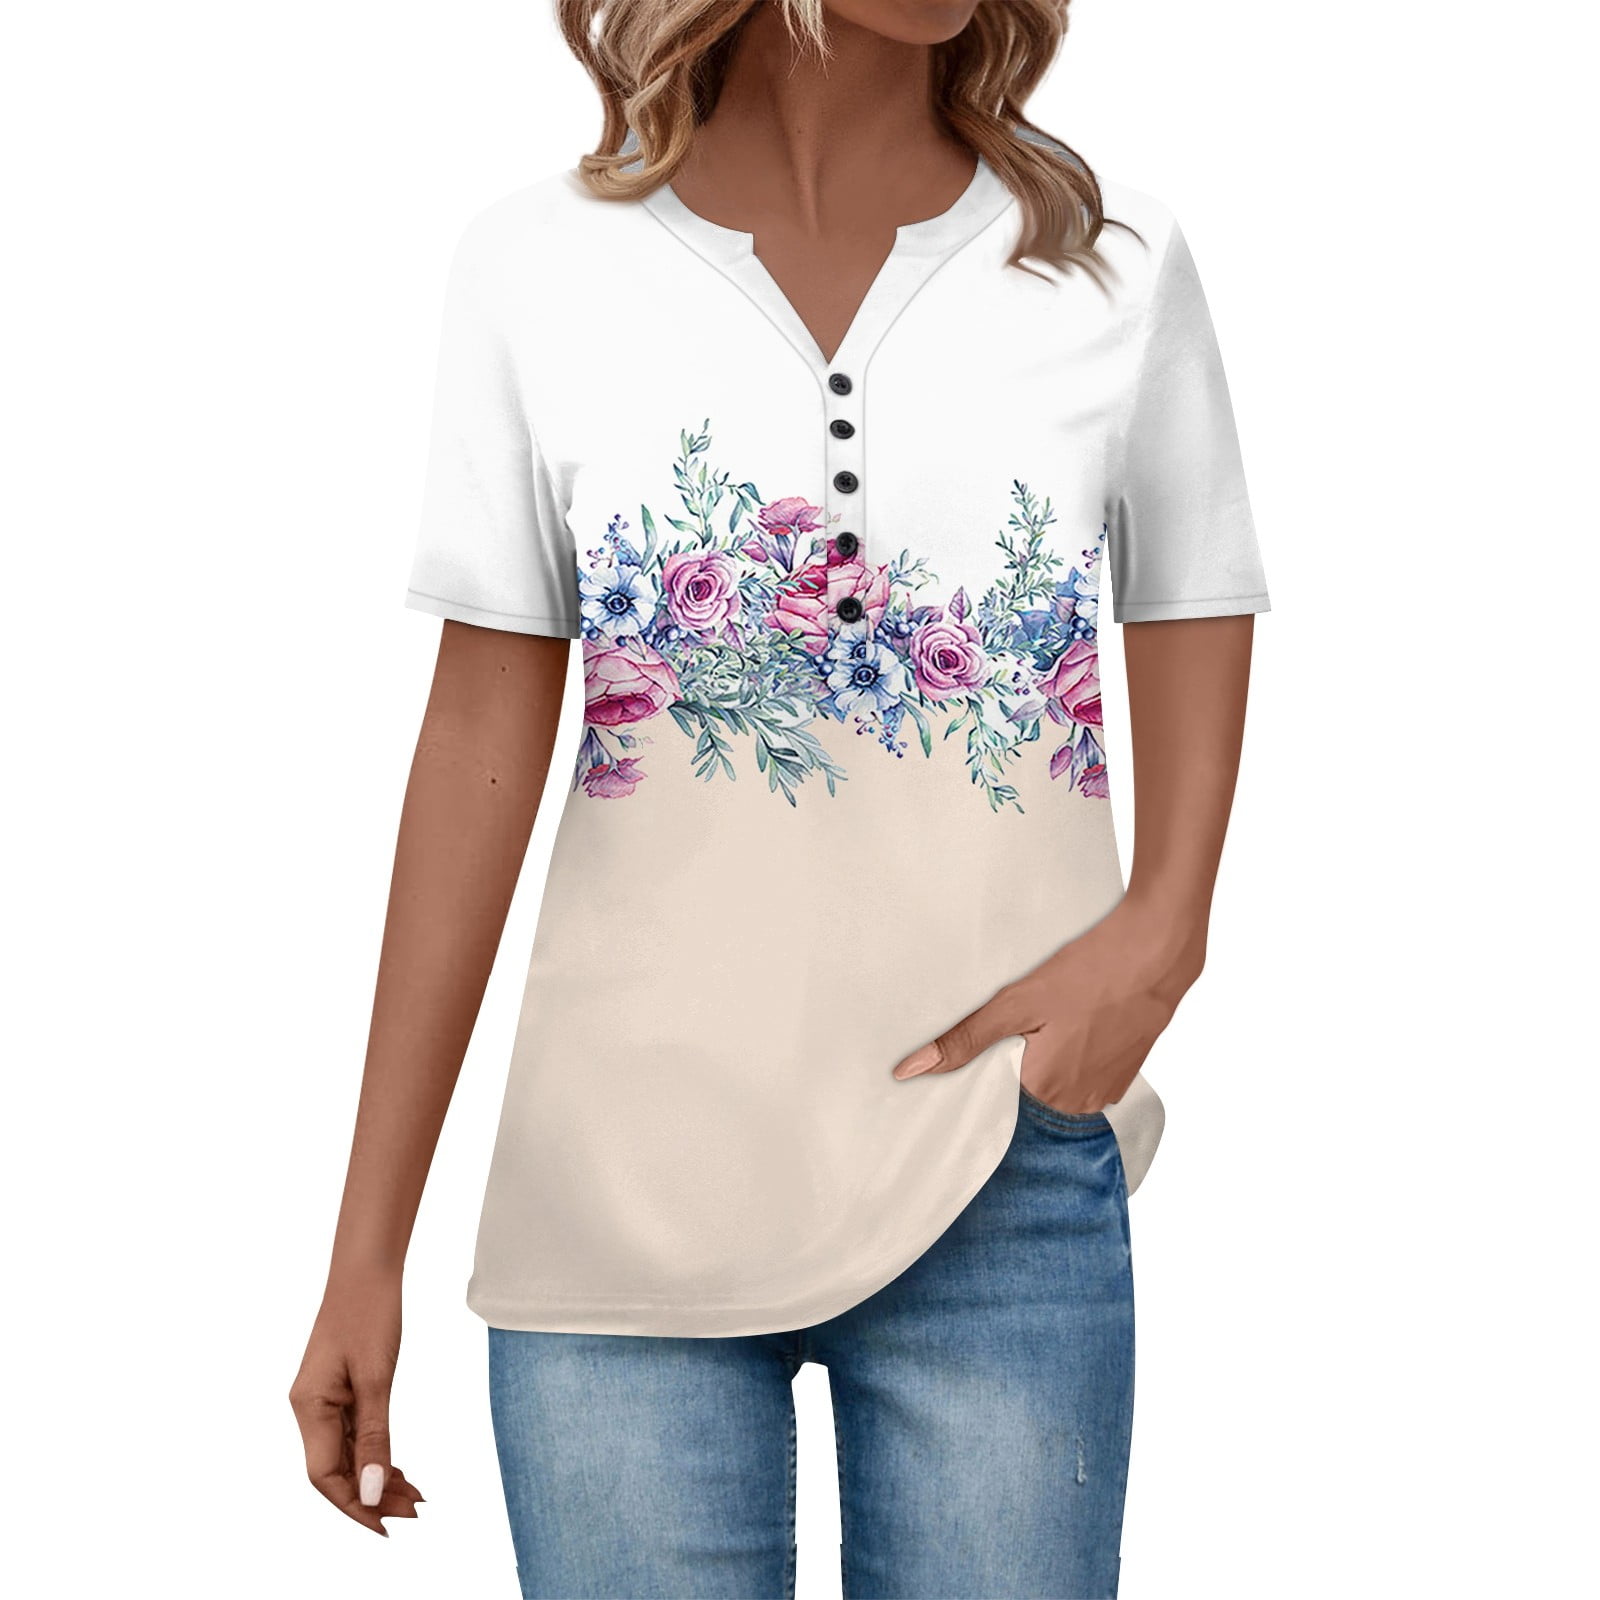 Kddylitq Women's Floral Short Sleeve Henley Button Shirts Plus Size ...